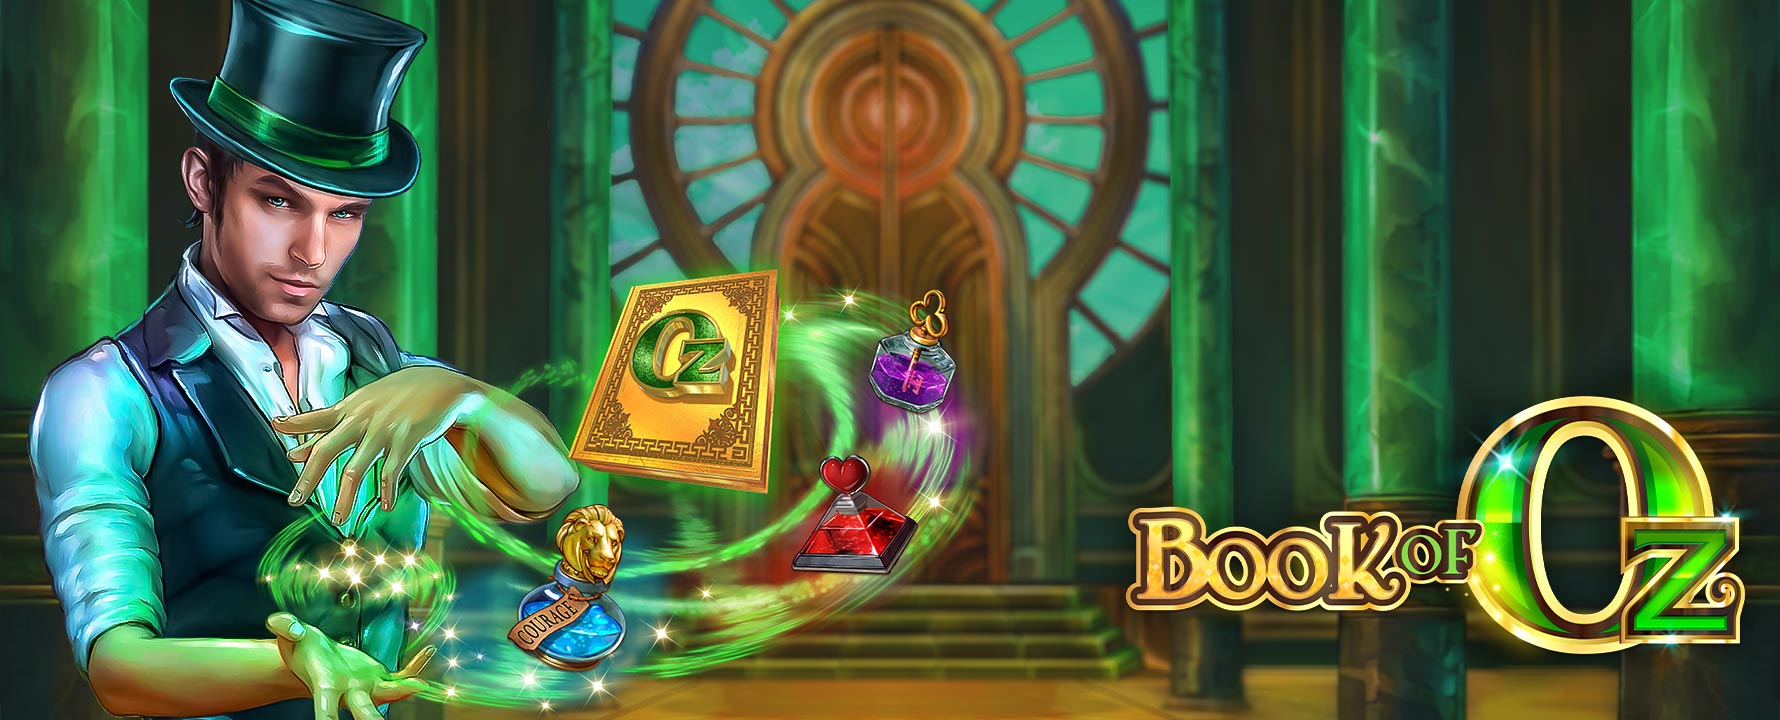 Raise the curtain on Microgaming’s Book of Oz online slot game